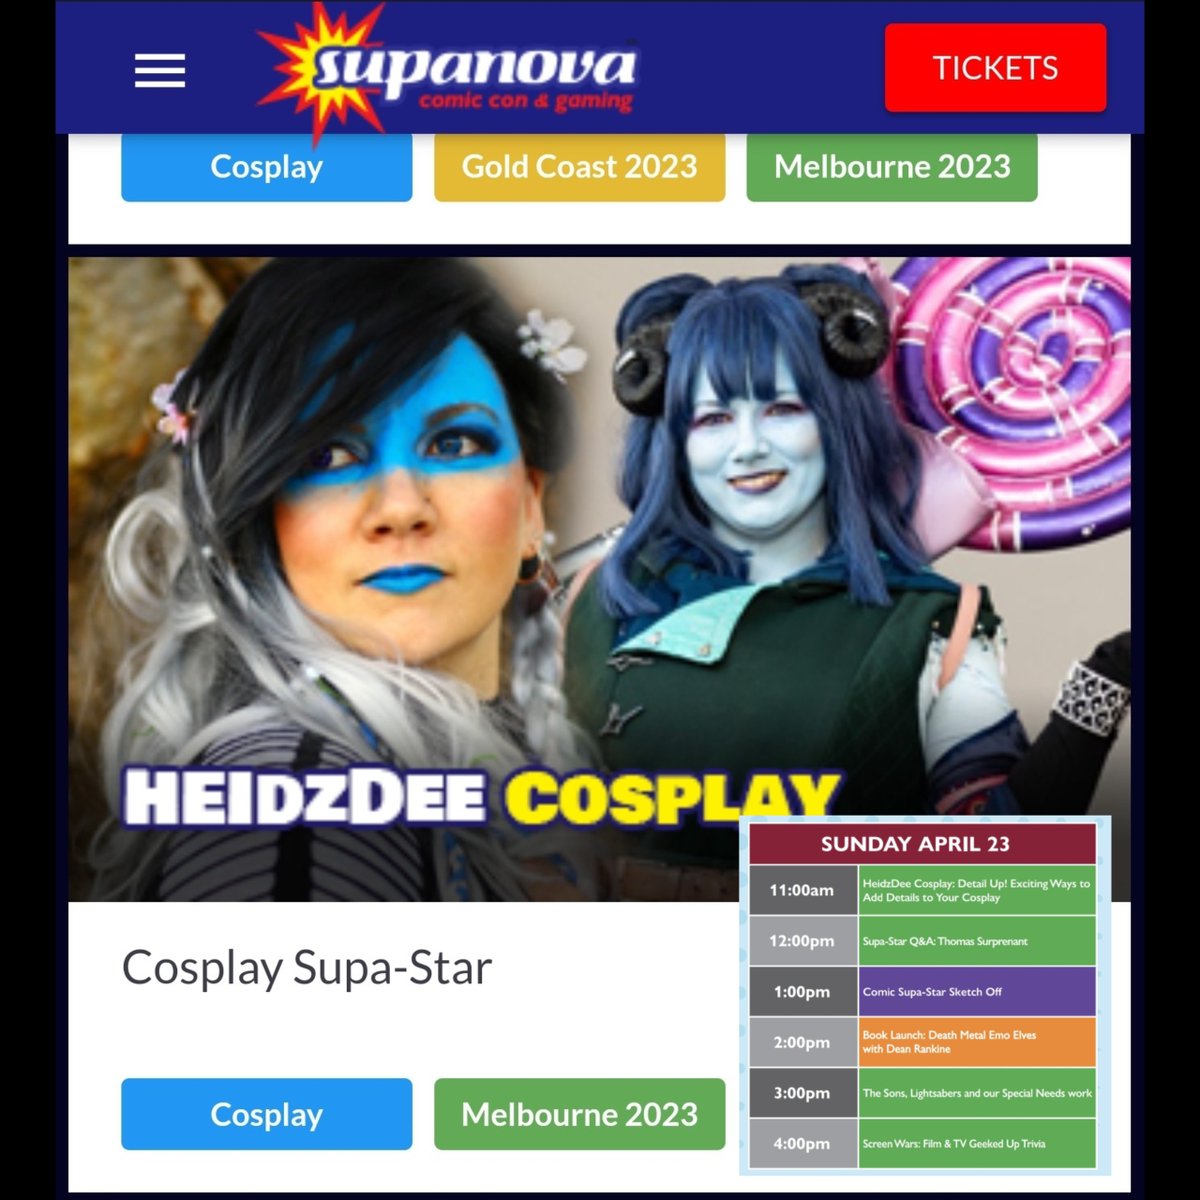 🌟🔴🟡⚫️ Naarm mob ⚫️🟡🔴🌟

If you are planning to come support our deadly Indigenous cosplayer!
》HeidzDee Cosplay《 
at @SupanovaExpo will be having hosting a Panel on Sunday 23rd @ 11AM
#Indiginerd #cosplayindigenous #cosplay #cosplayersofnaarm #cosplayer #blackfullatwitter